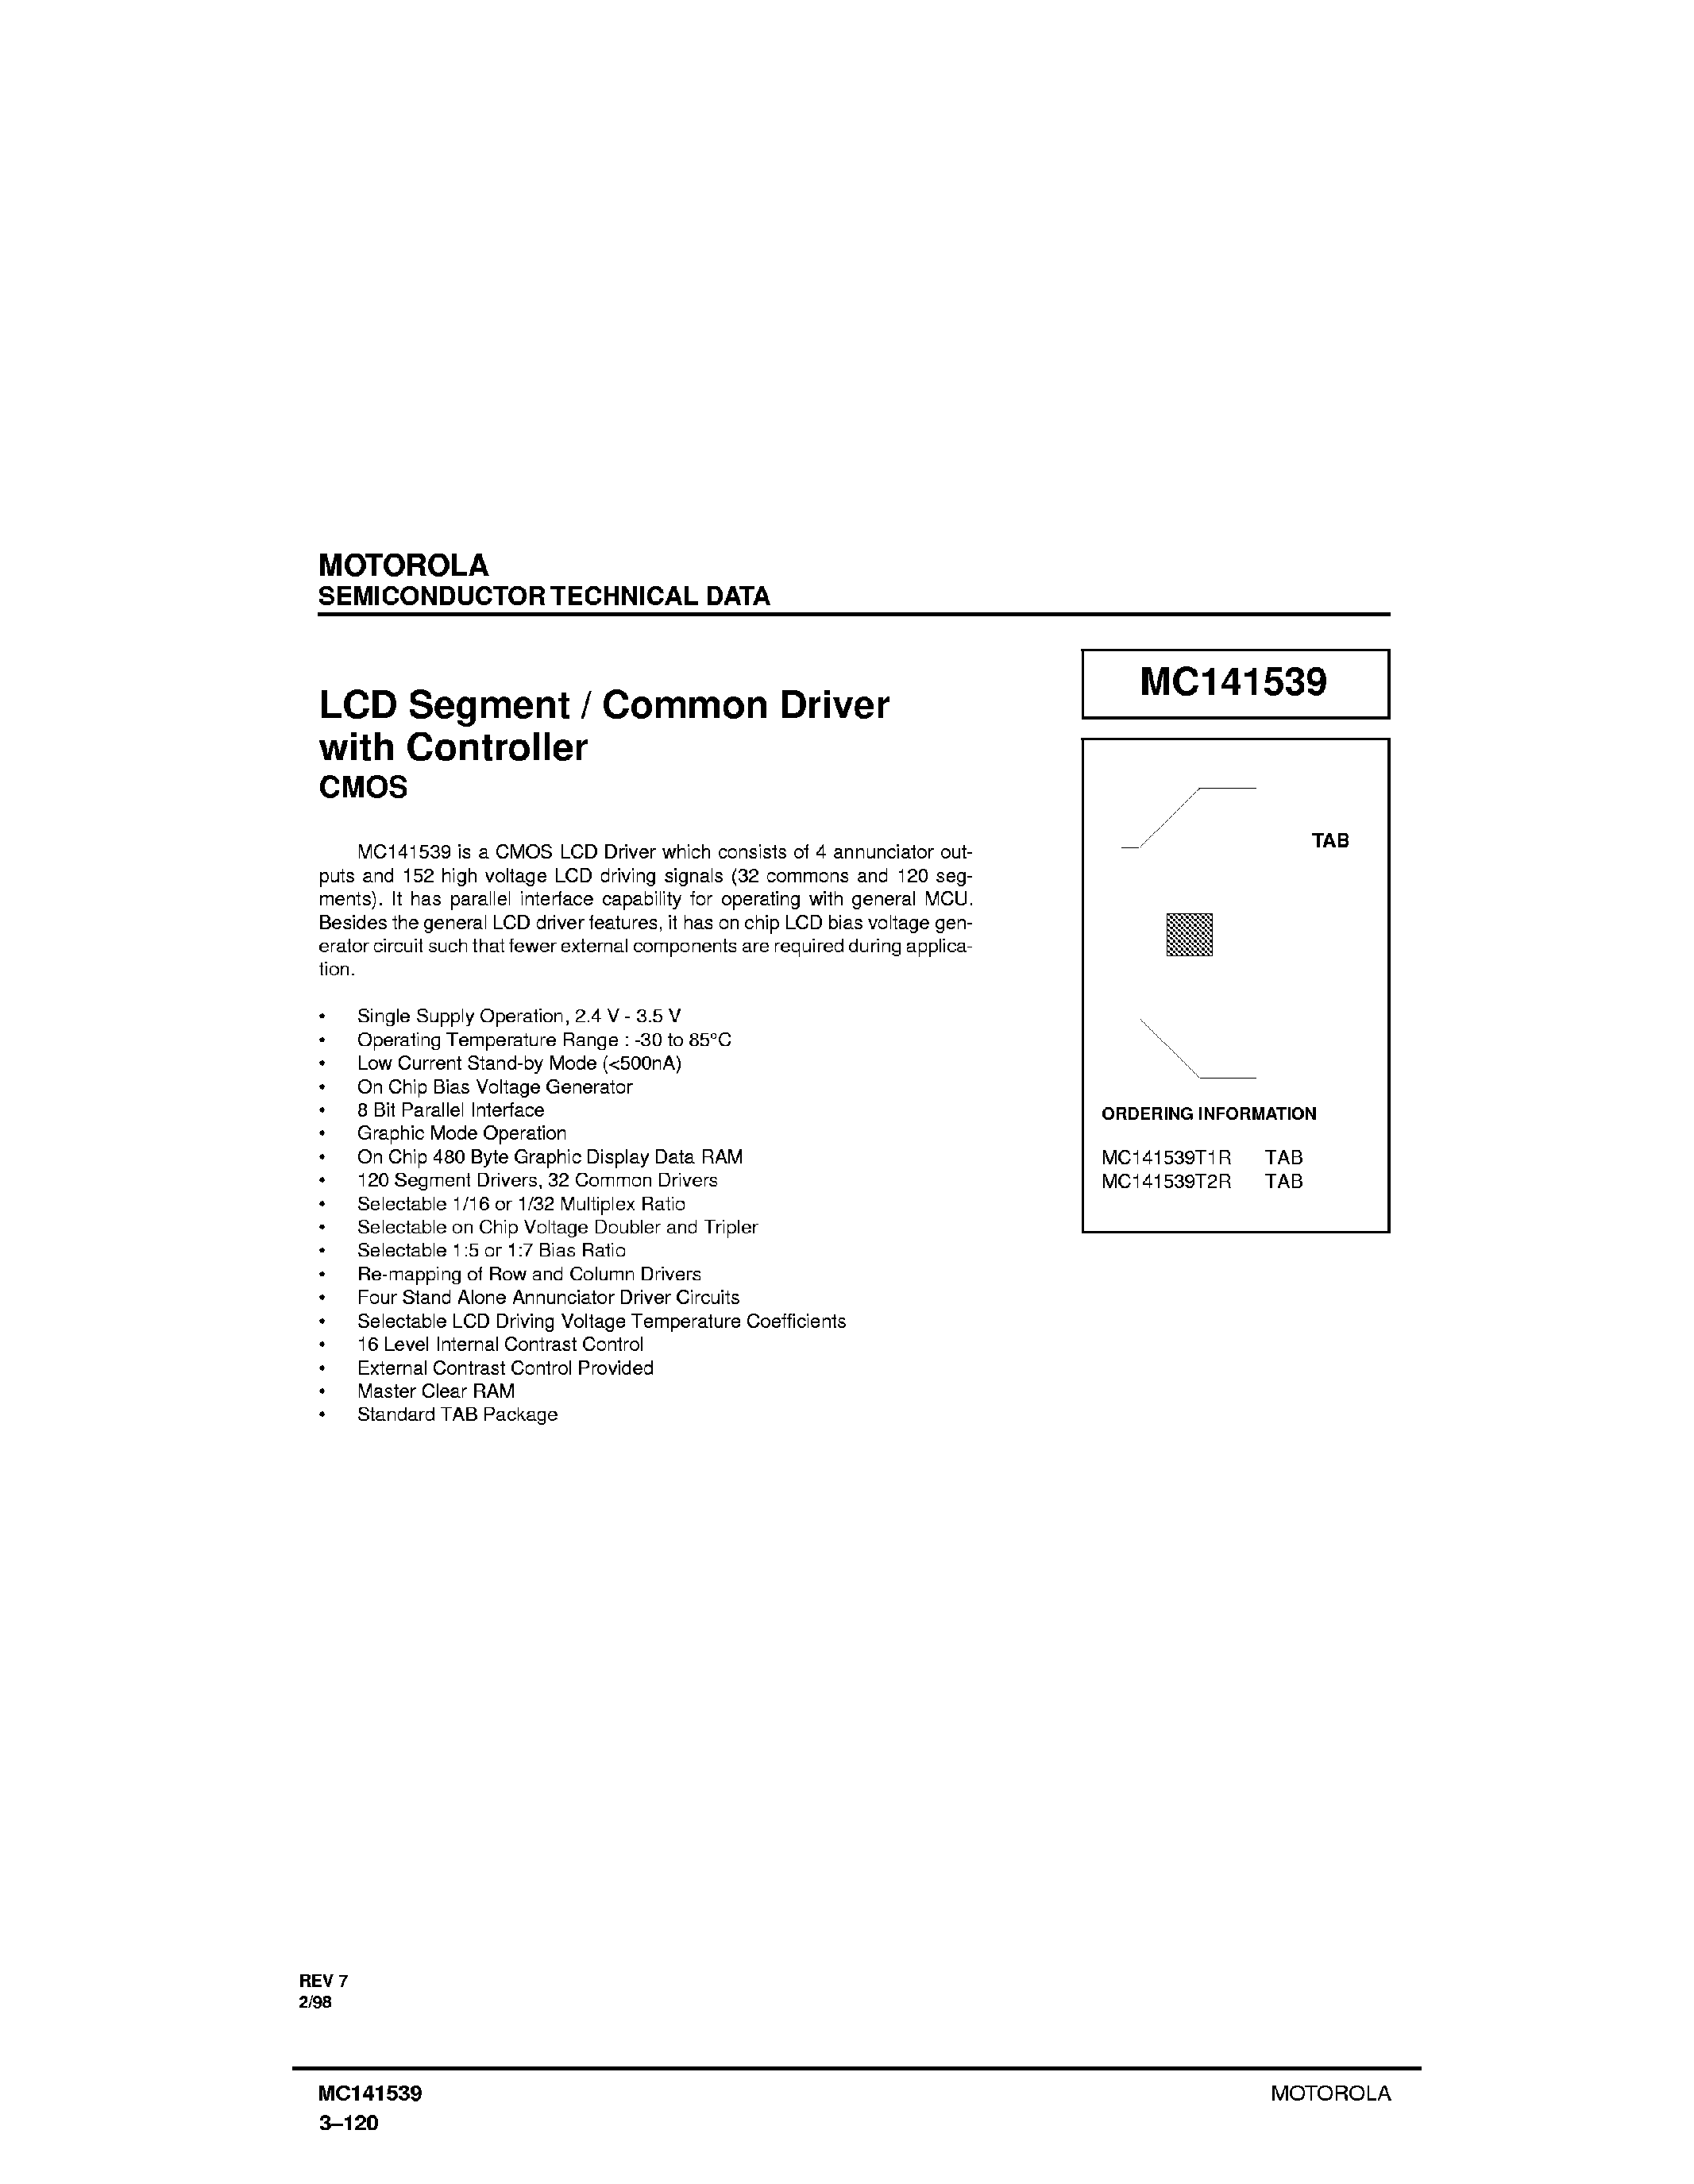 Даташит MC141539T2R - LCD Segment / Common Driver with Controller CMOS страница 1